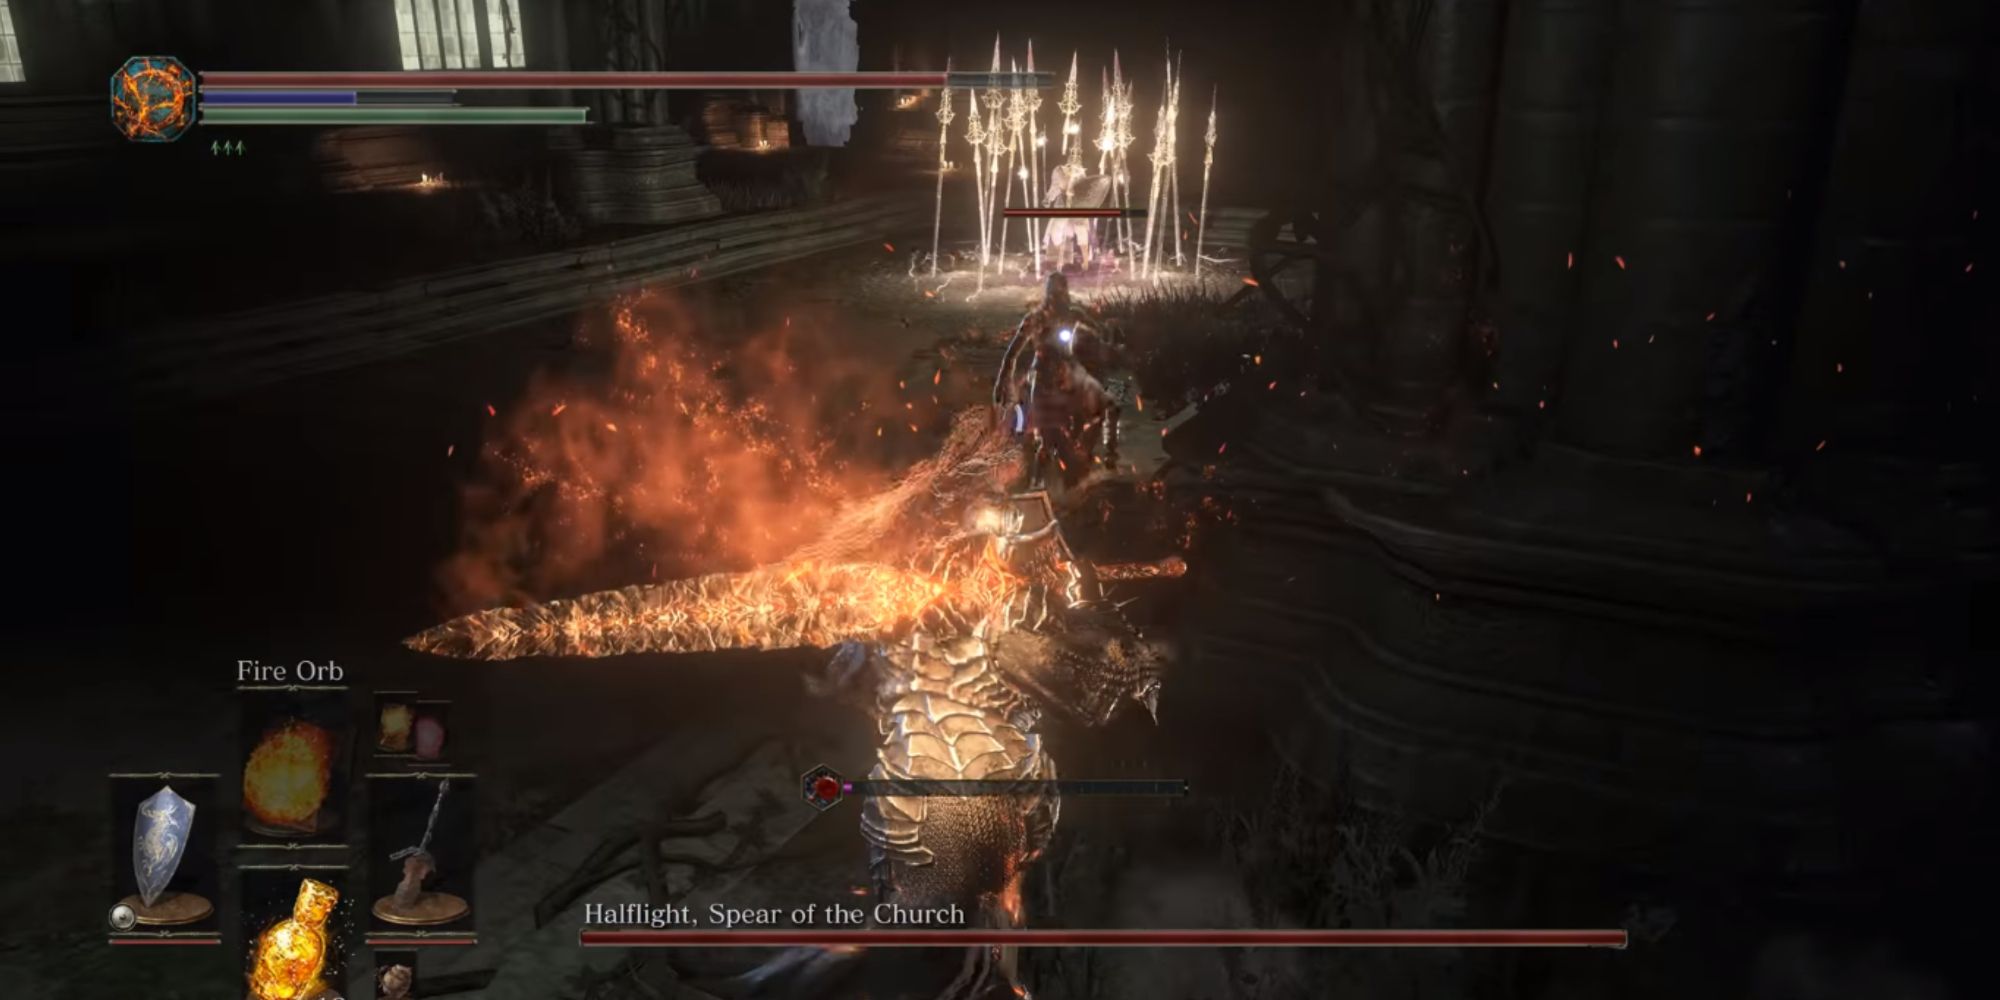 The player approaching the boss with his flaming sword.